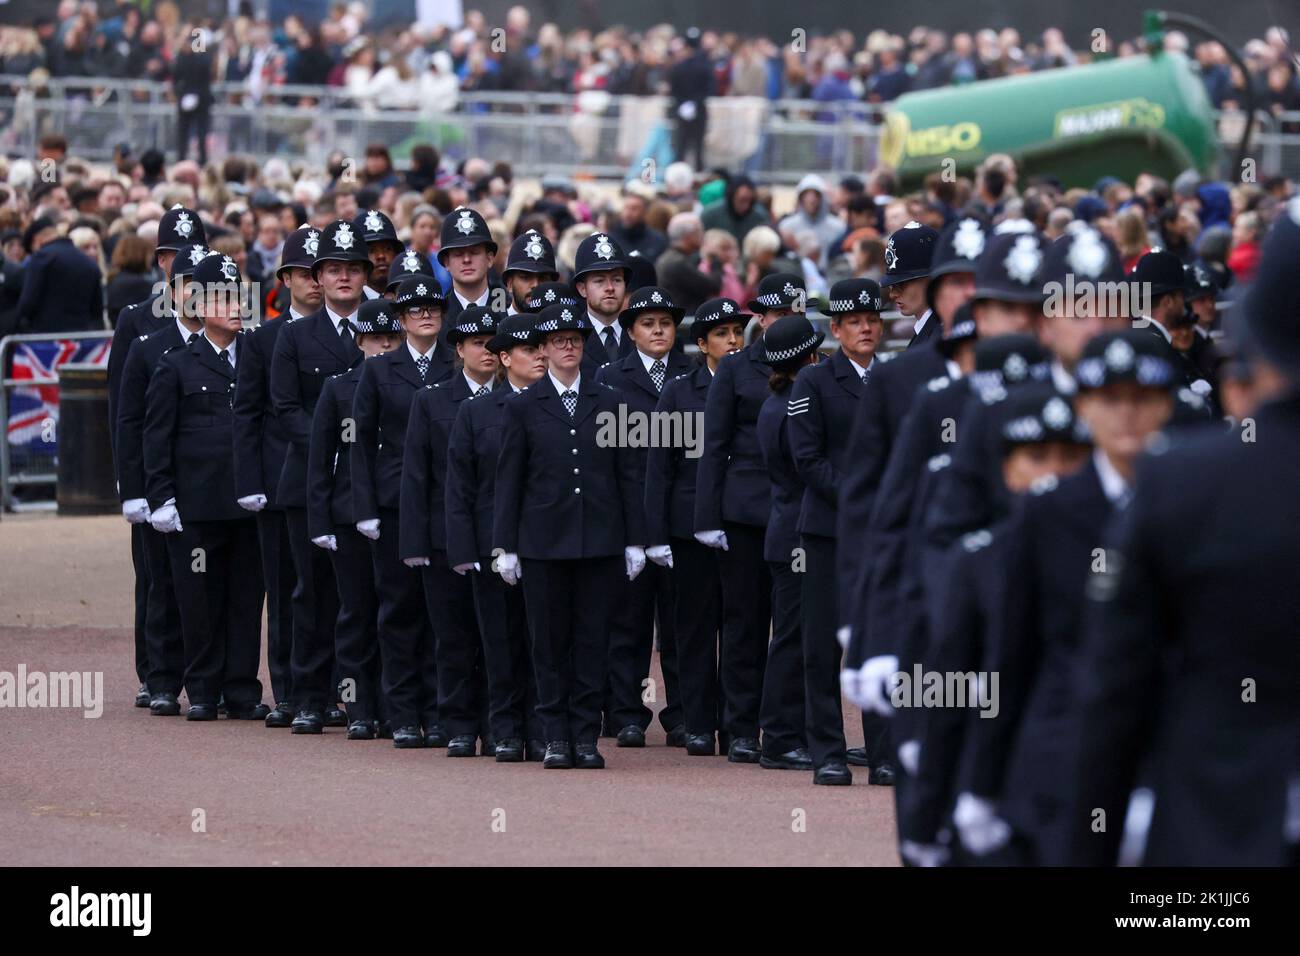 Police officers prepare on the day of the state funeral and burial of Britain's Queen Elizabeth, in London, Britain, September 19, 2022. REUTERS/Tom Nicholson Stock Photo